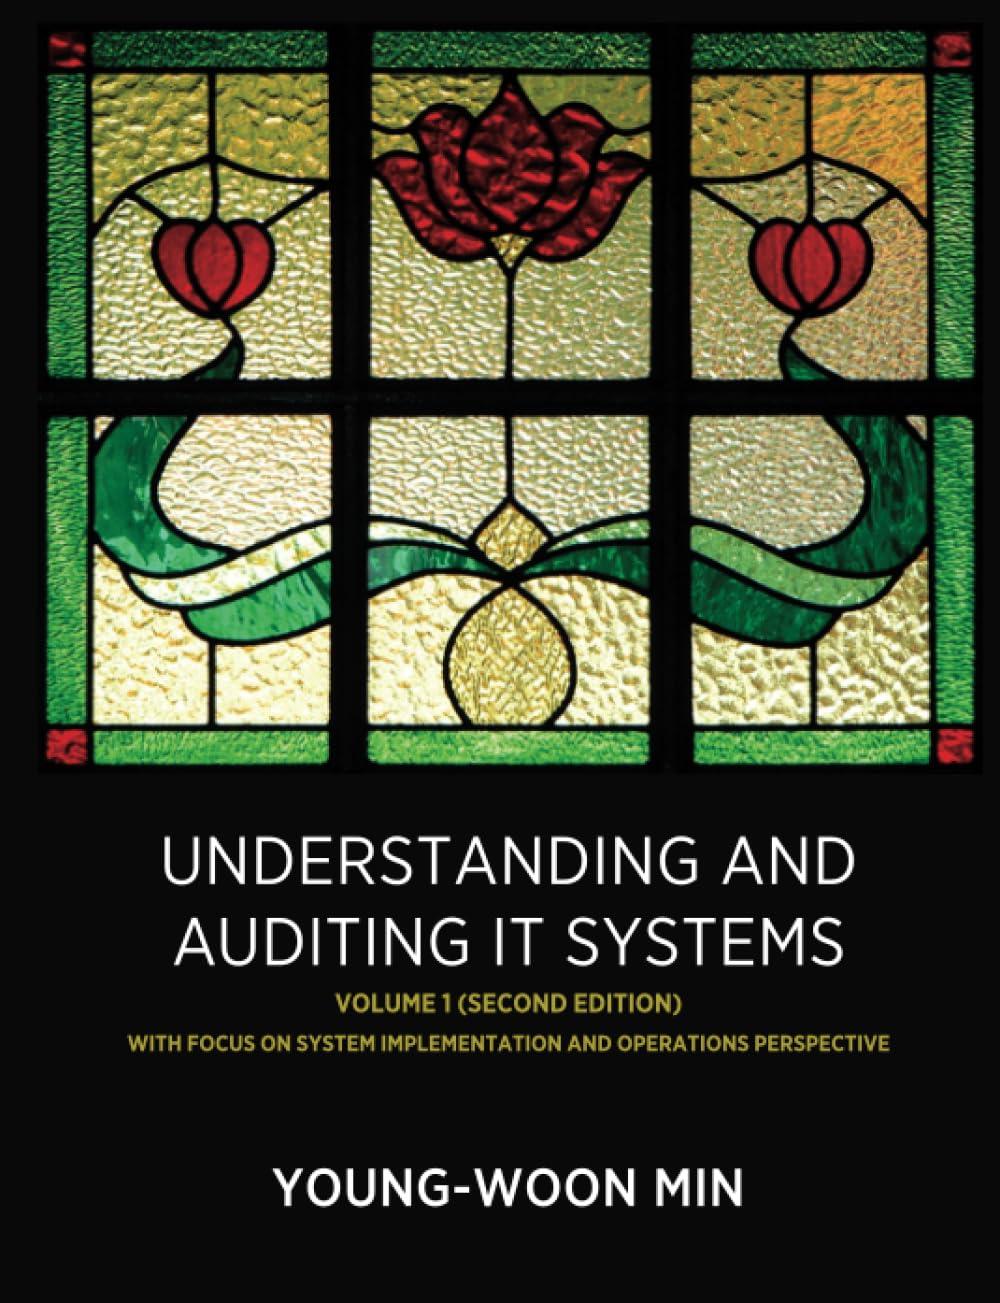 understanding and auditing it systems volume 1 2nd edition young-woon min 978-1257124084